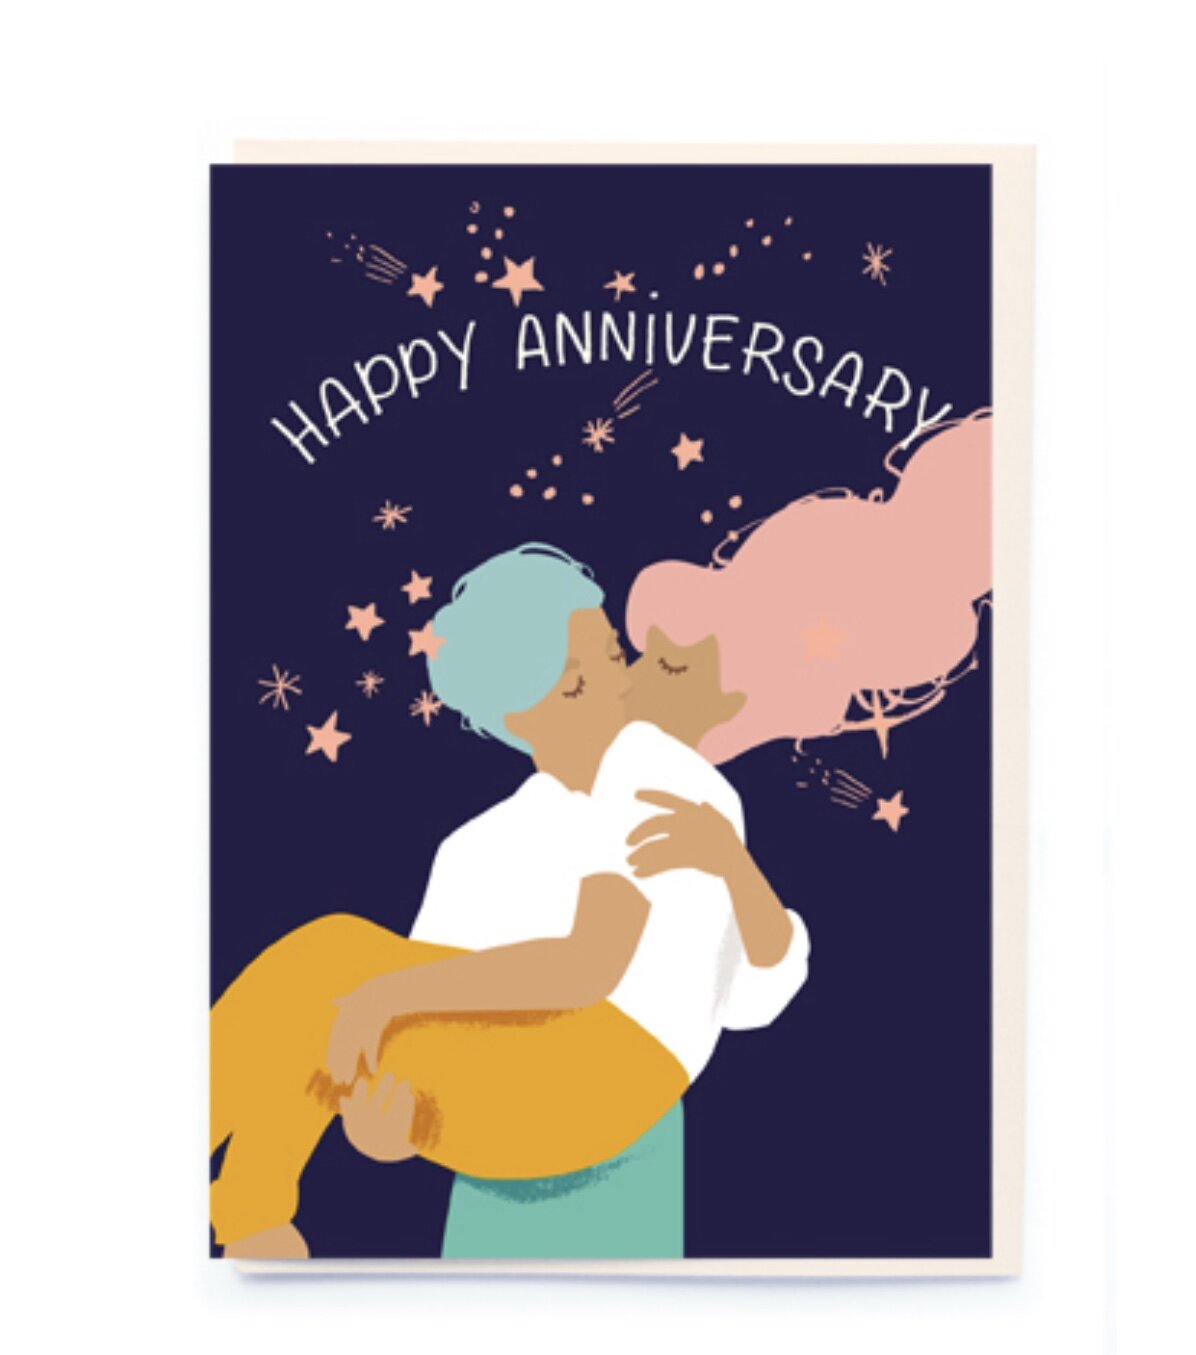 HAPPY ANNIVERSARY | CARD BY NOI